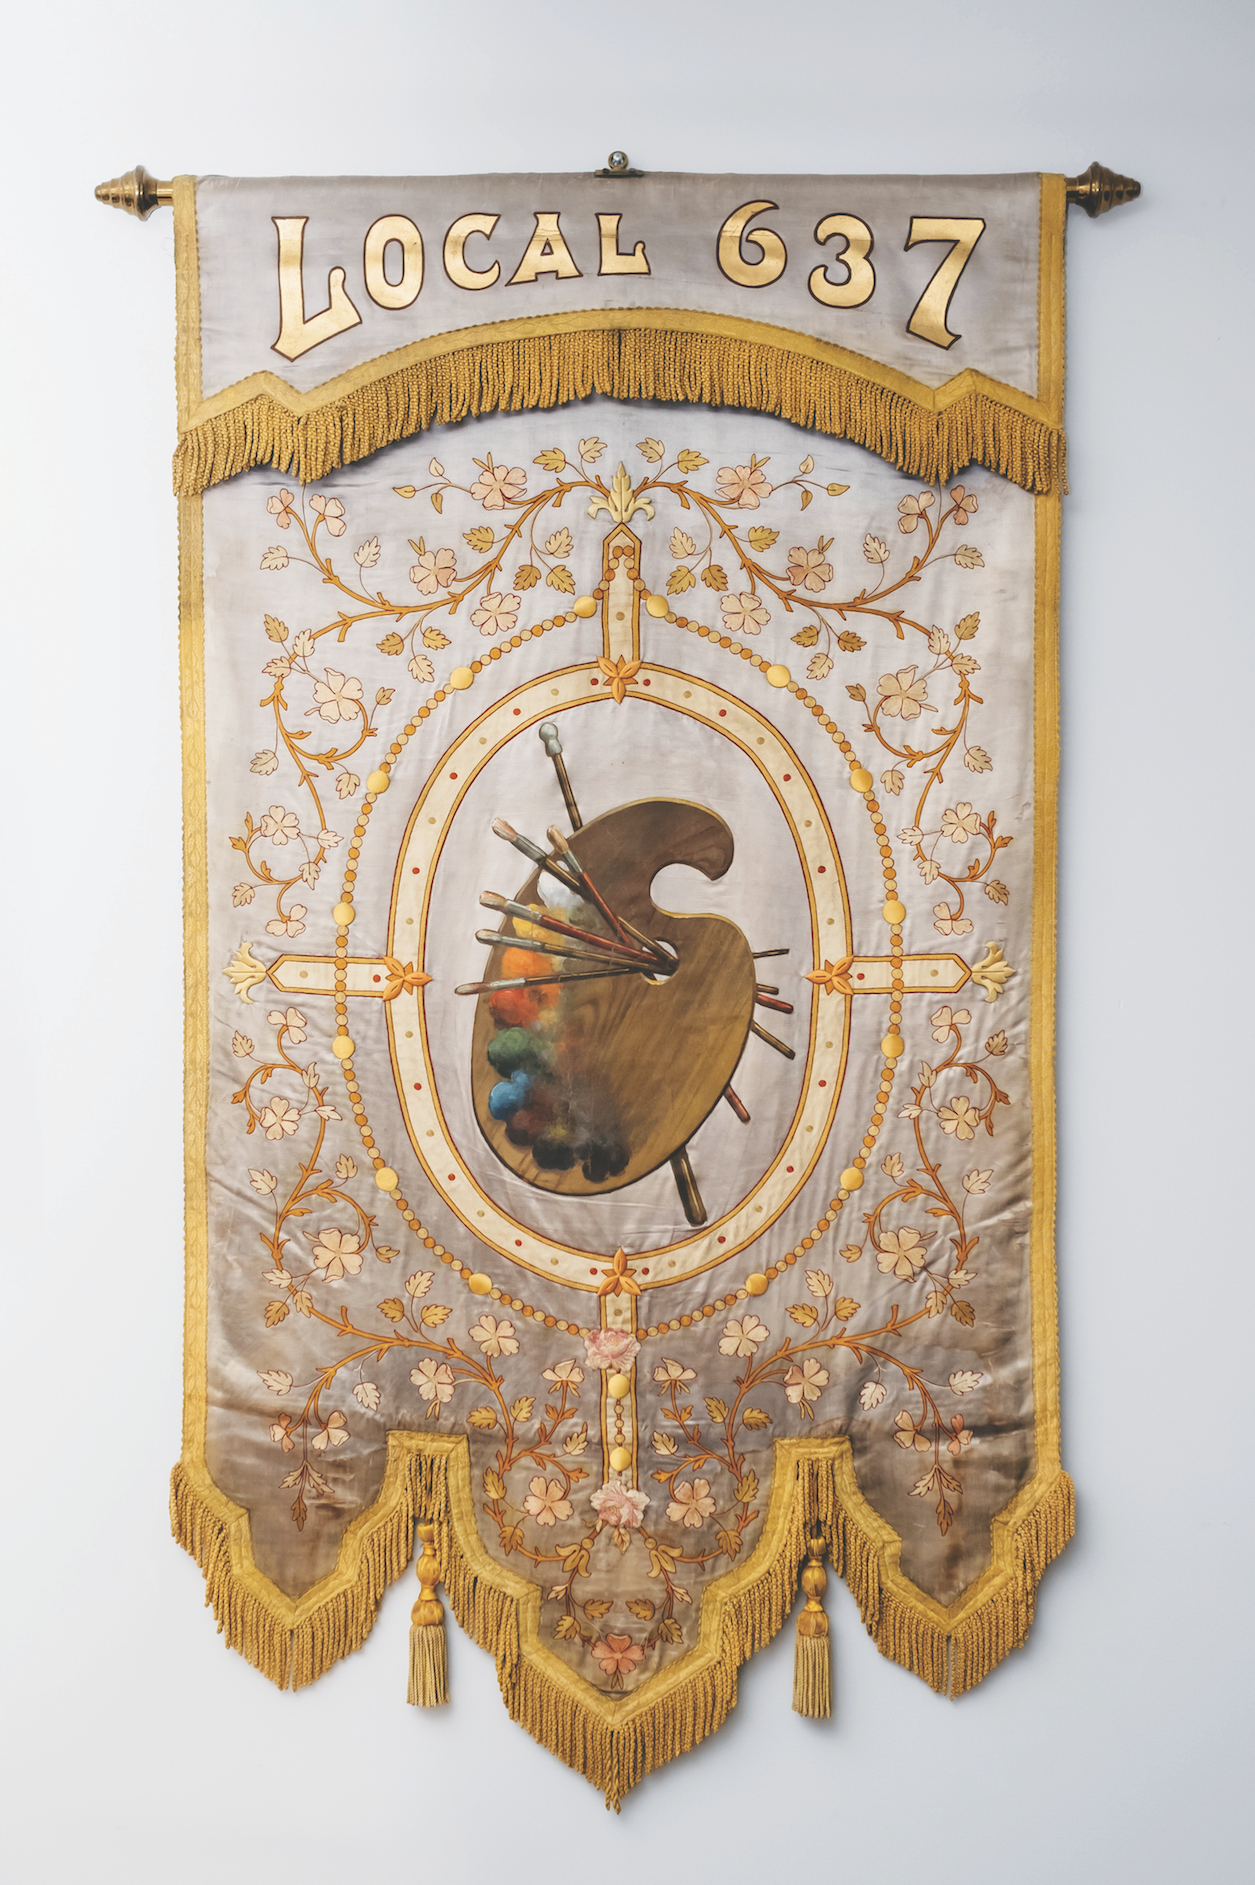 A banner from a union of Swedish Painters in Chicago.